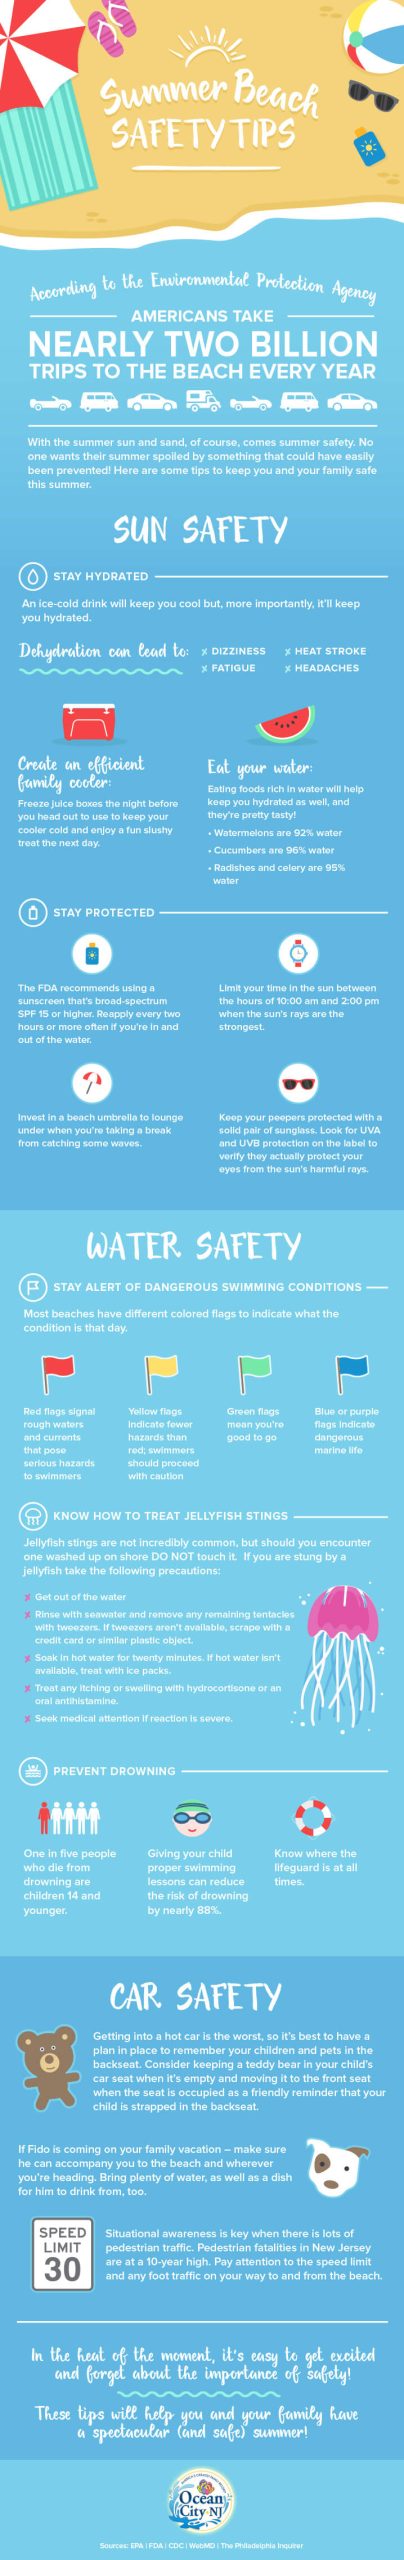 summer beach safety tips infographic